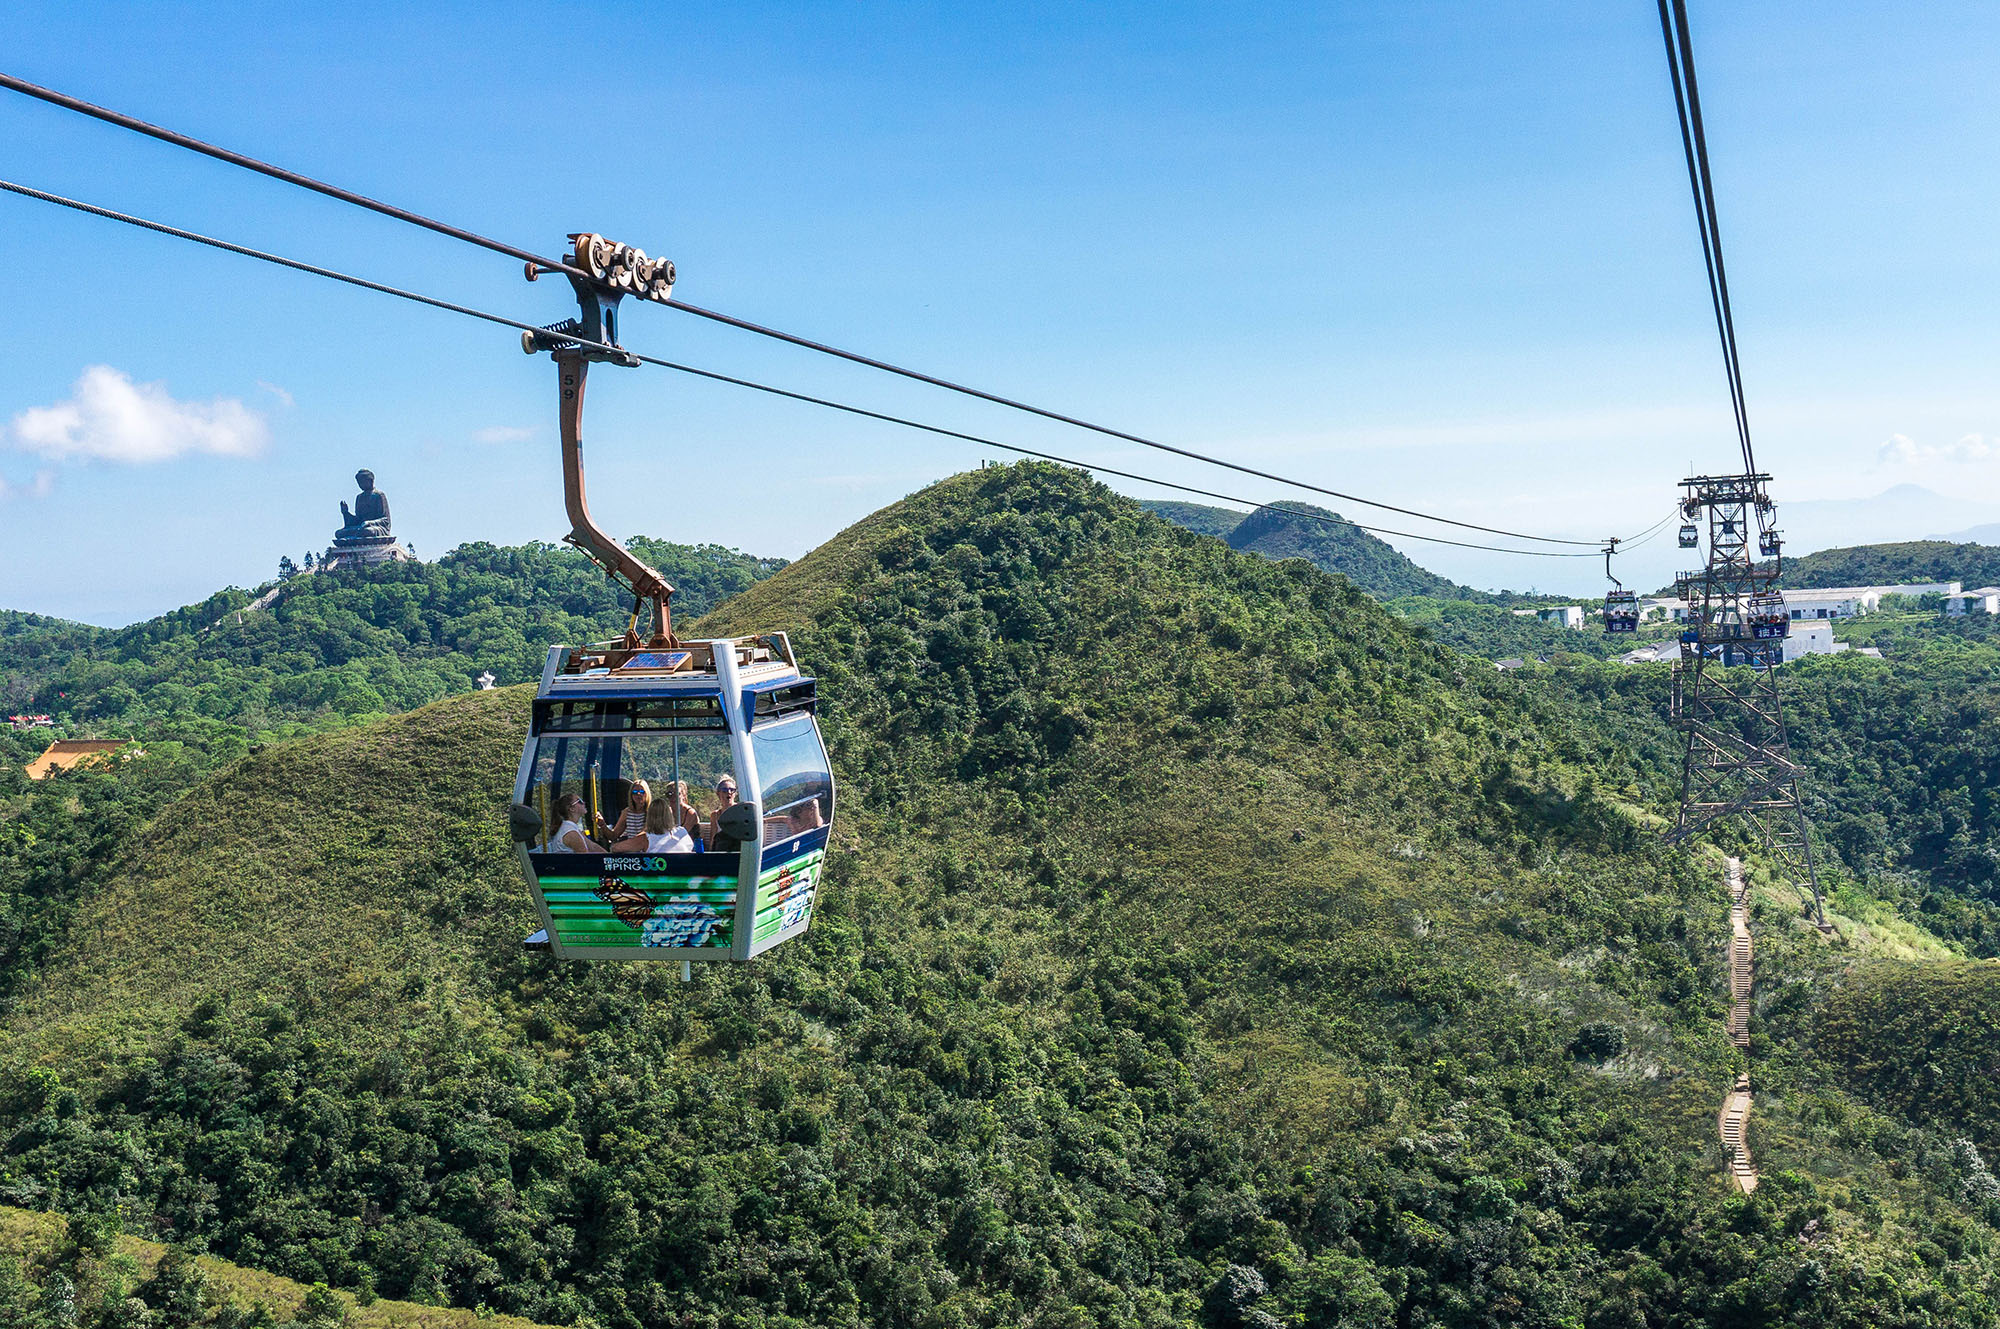 Ngong Ping Cable Car Ride Is The Longest Bi Cable Ropeway In Asia